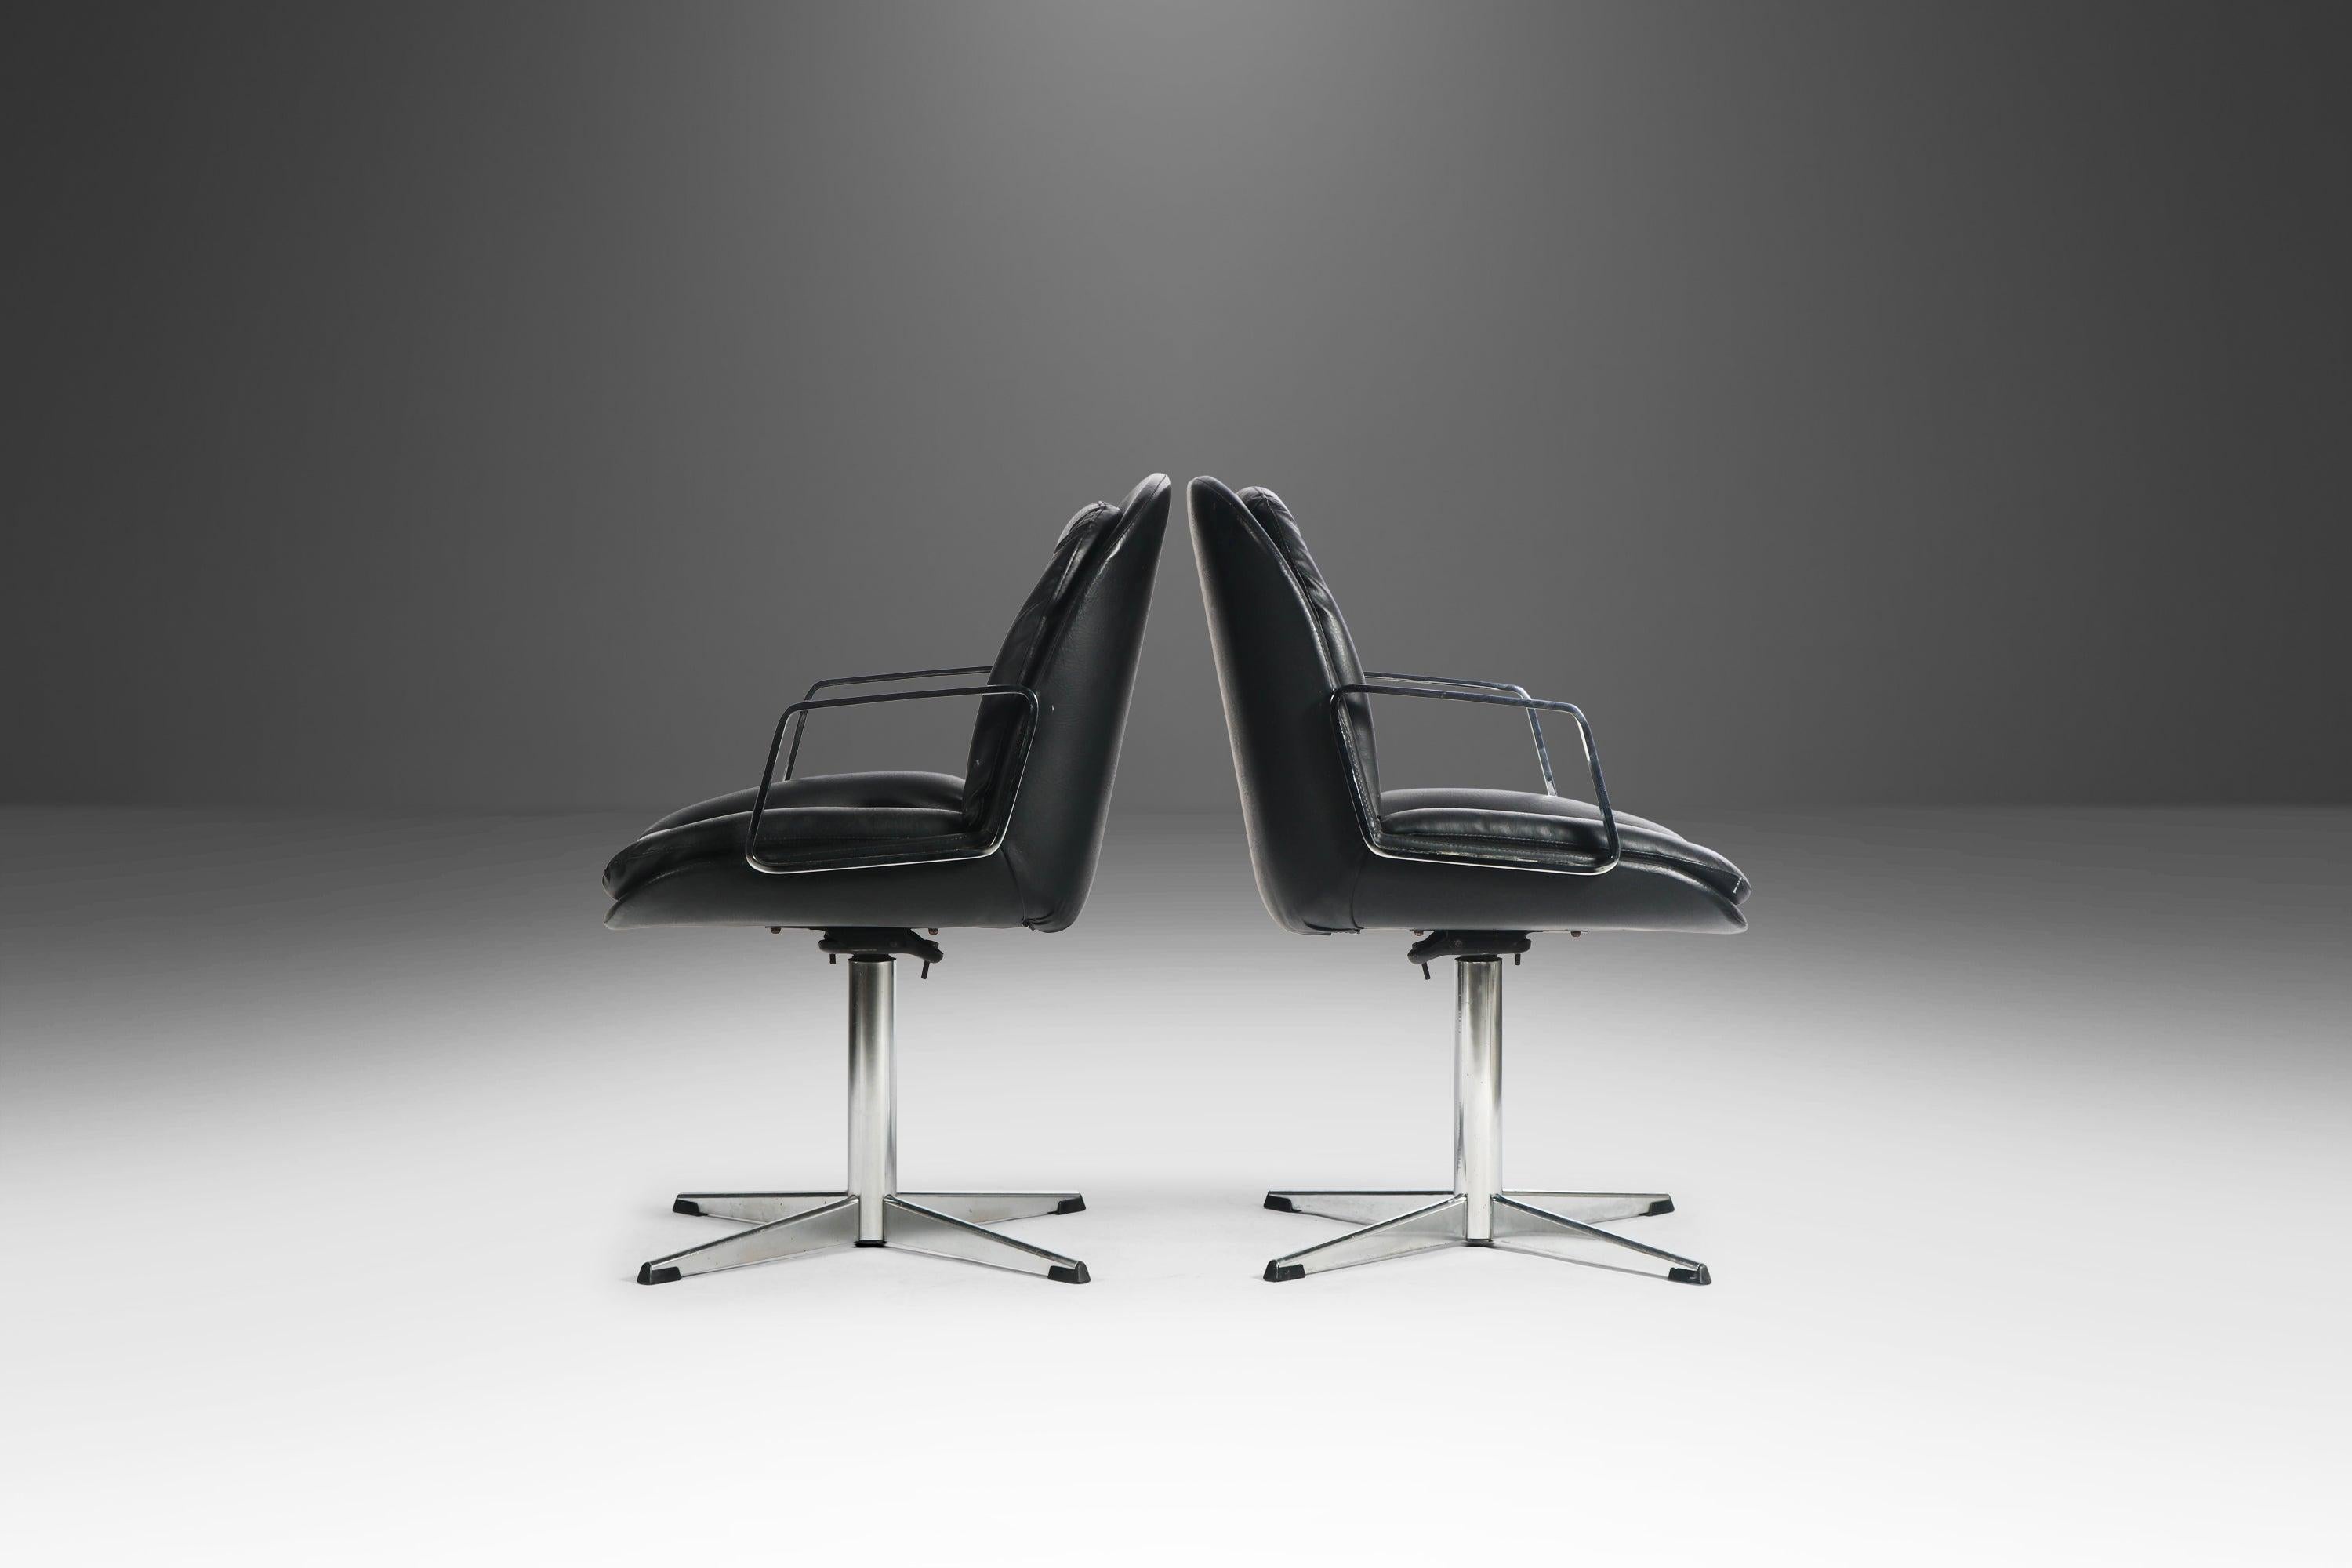 Set of Two (2) Black & Chrome High Stance Office Chairs, USA, c. 1960's For Sale 1